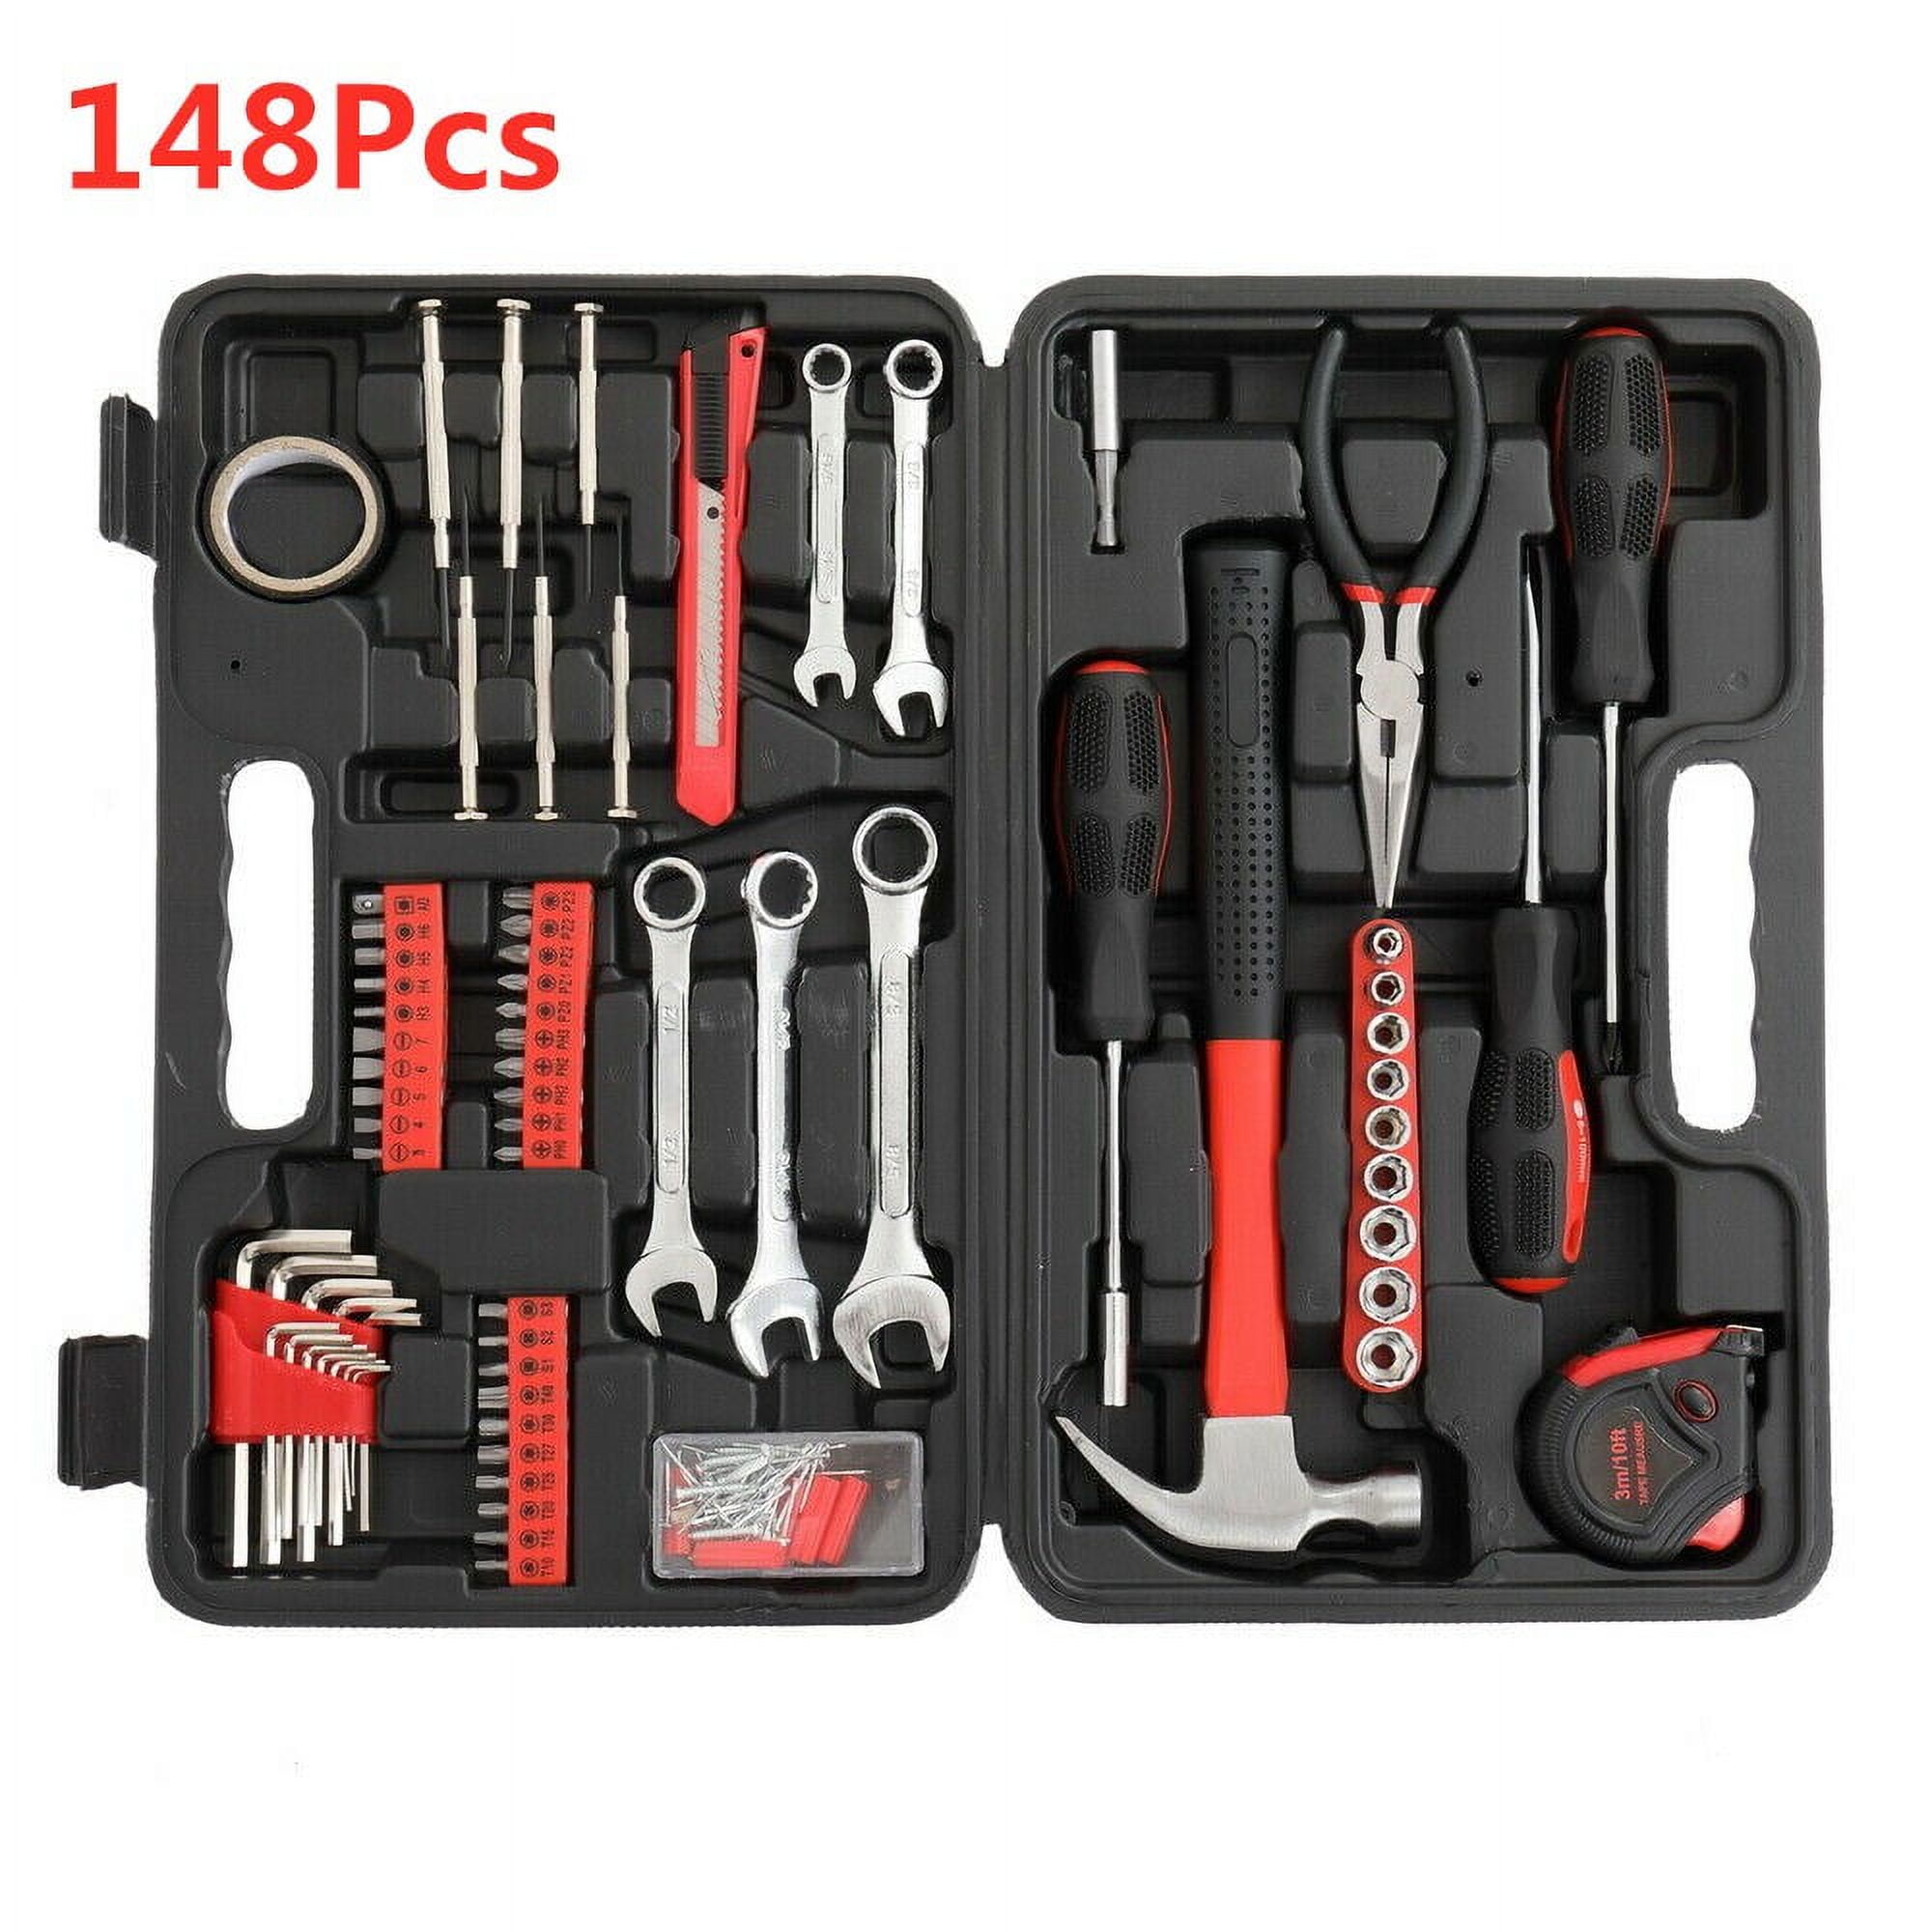 Hyper Tough 160-Piece Toolbox Set for Home and Auto